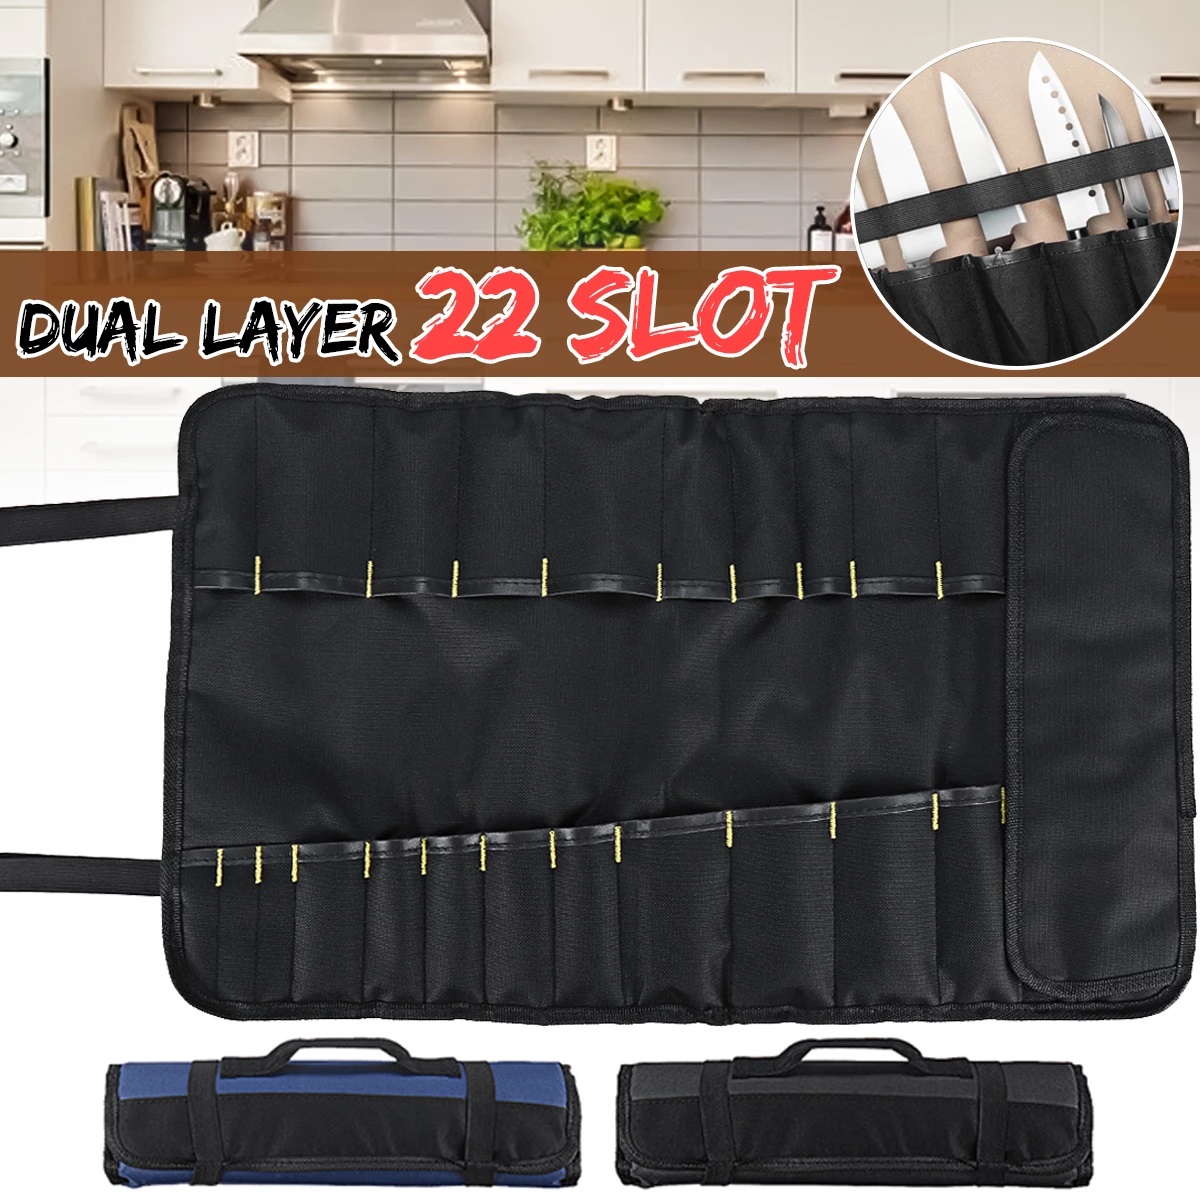 Roll Knife Bag Durable Kitchen Cooking Accessories Multifunction Supplies Carry Case Bag Storage Kitchen Tool Chef Knife Bag